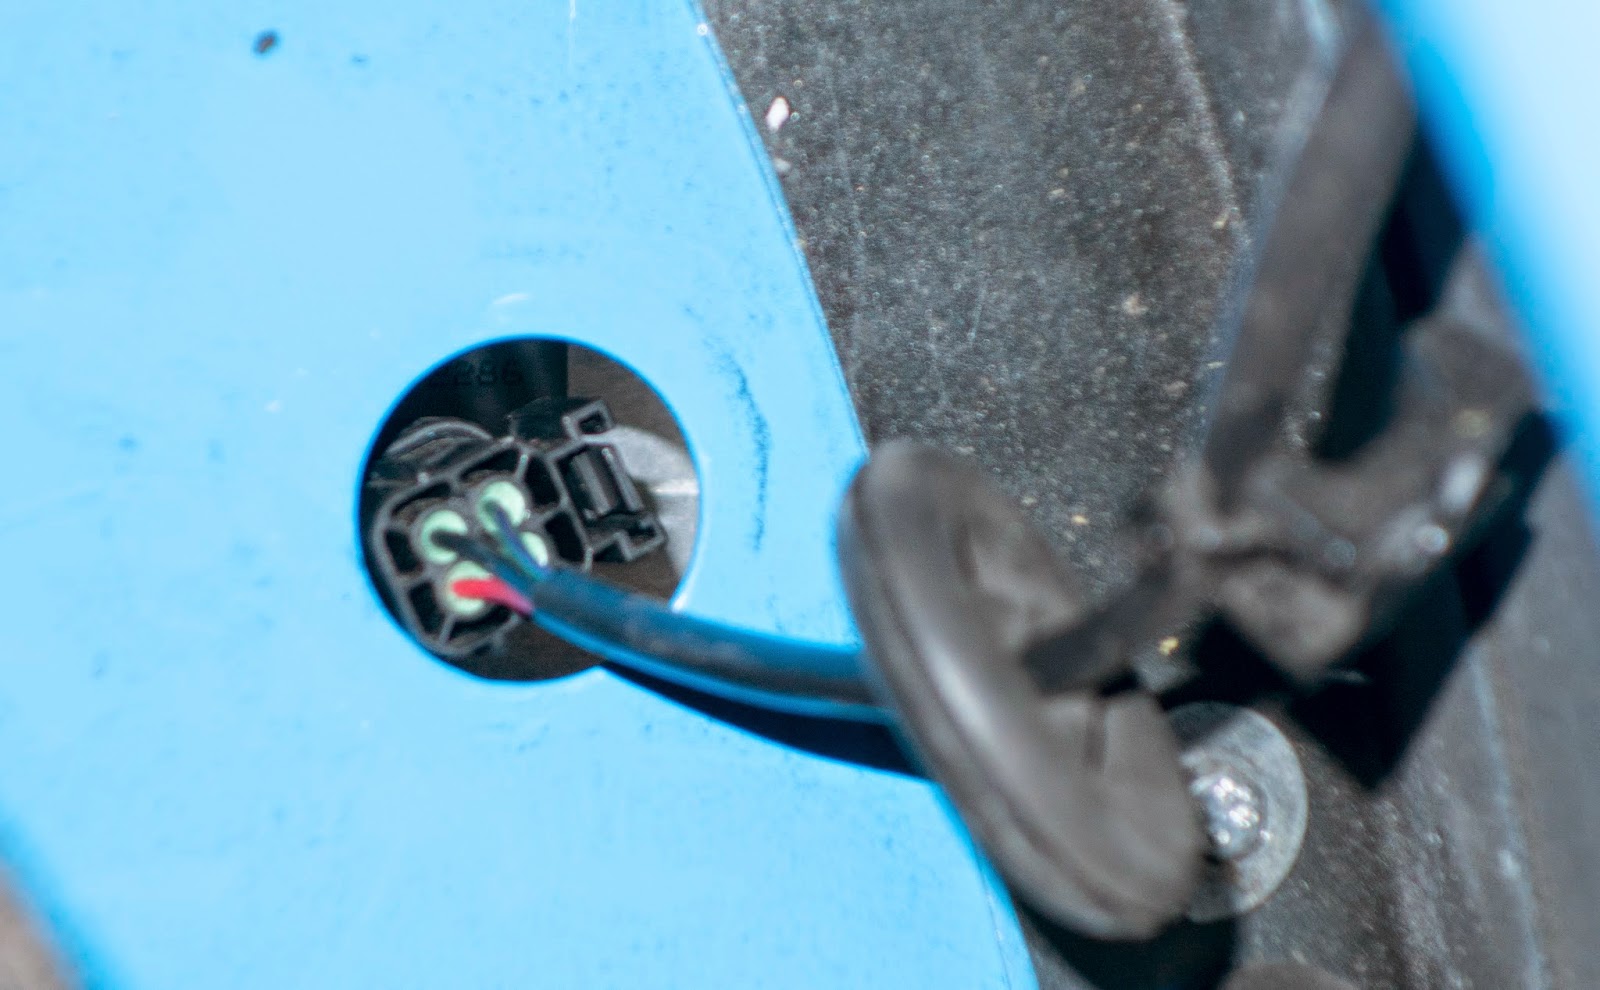 Rubber grommet removed showing light connection block.